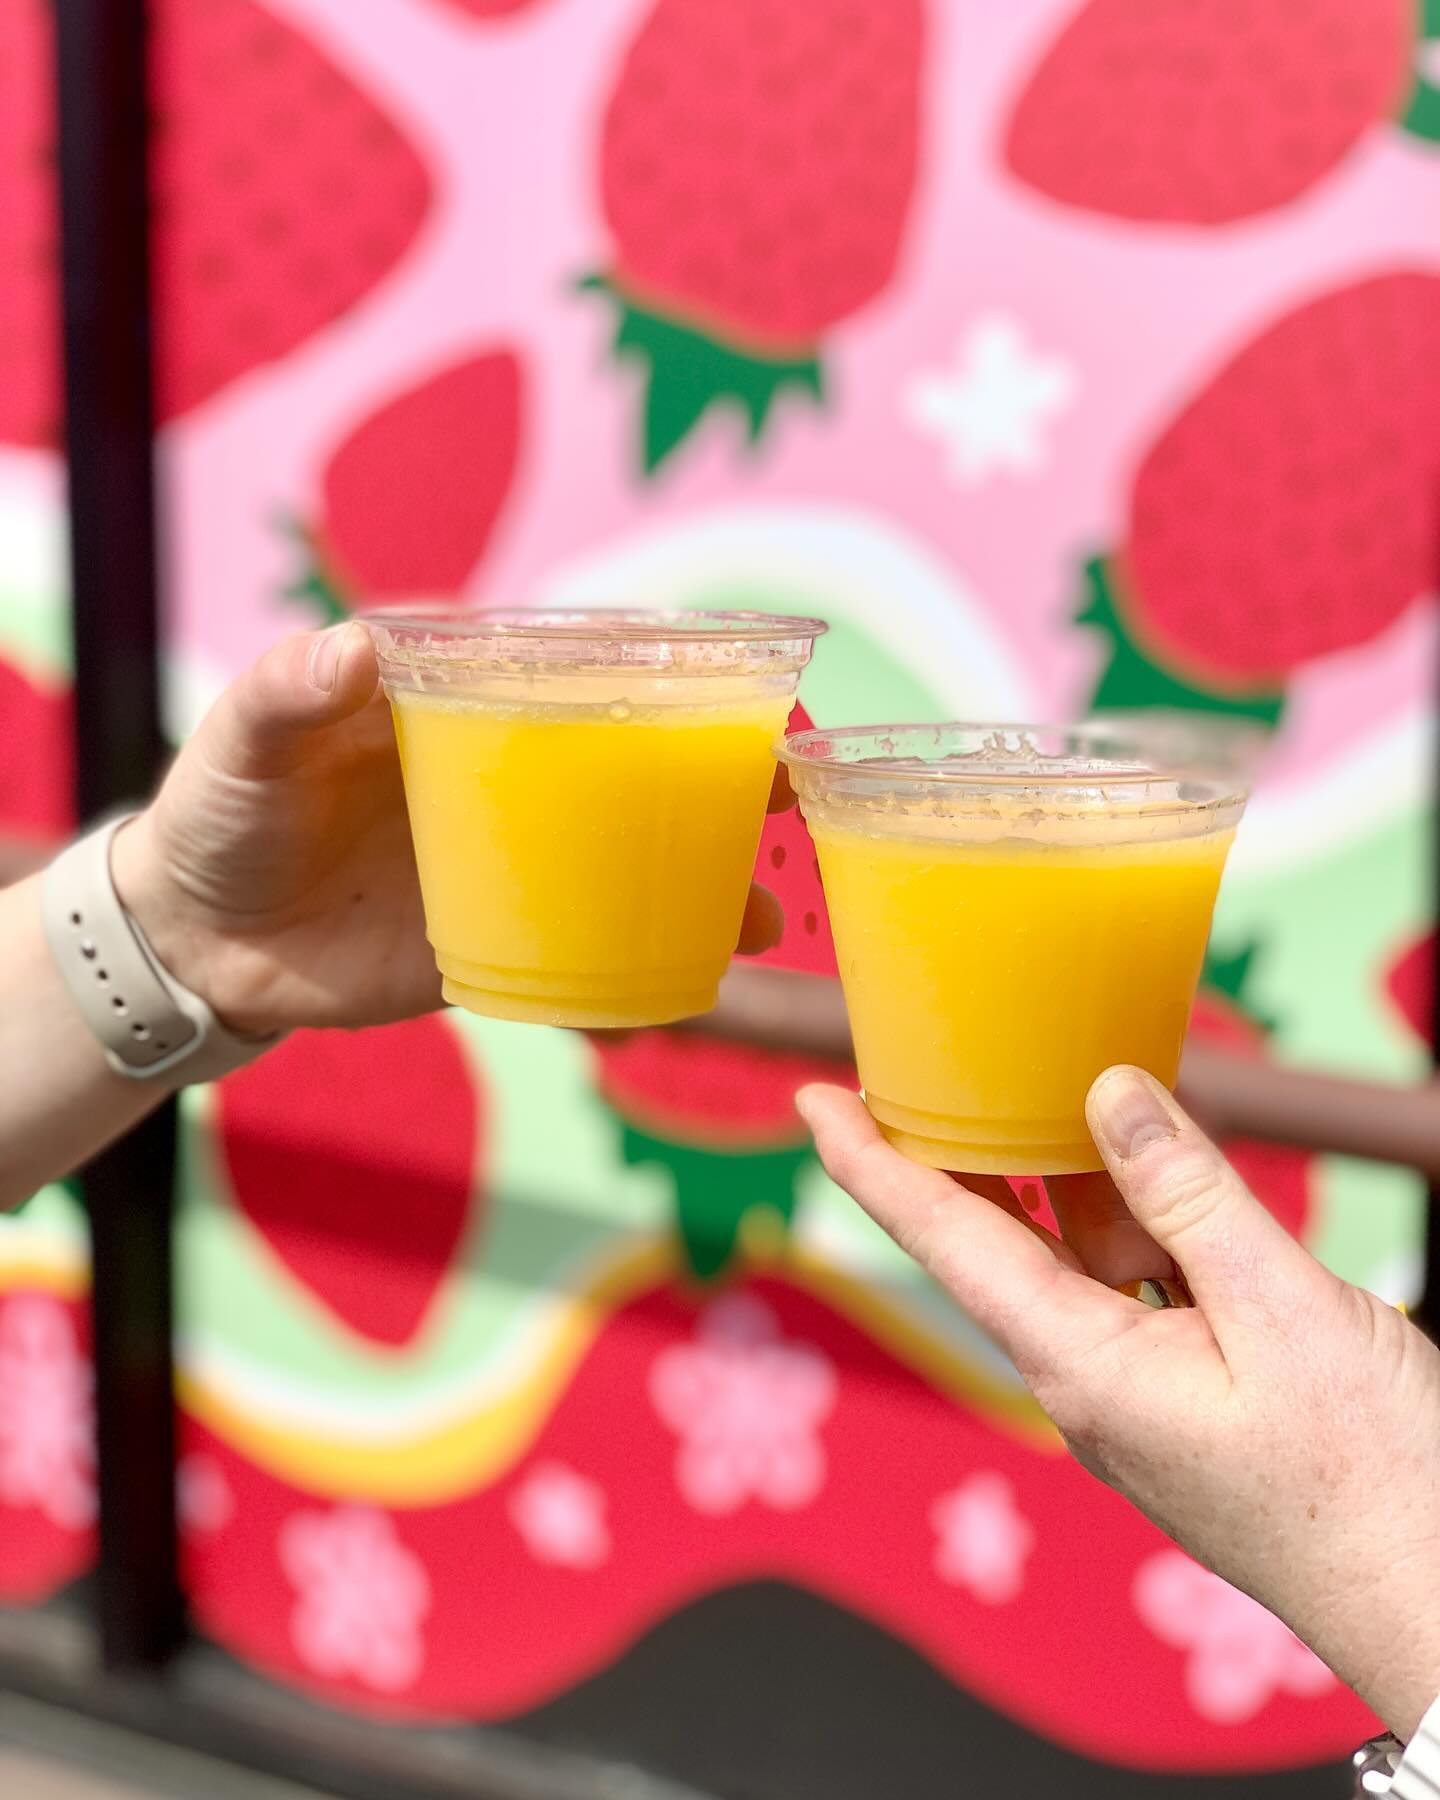 It&rsquo;s almost time for some MOMosas. Moms, take a load off this weekend and come have drink! We&rsquo;ll be serving mimosas this Friday - Sunday. *proof of motherhood not required - bubbles for ALL!